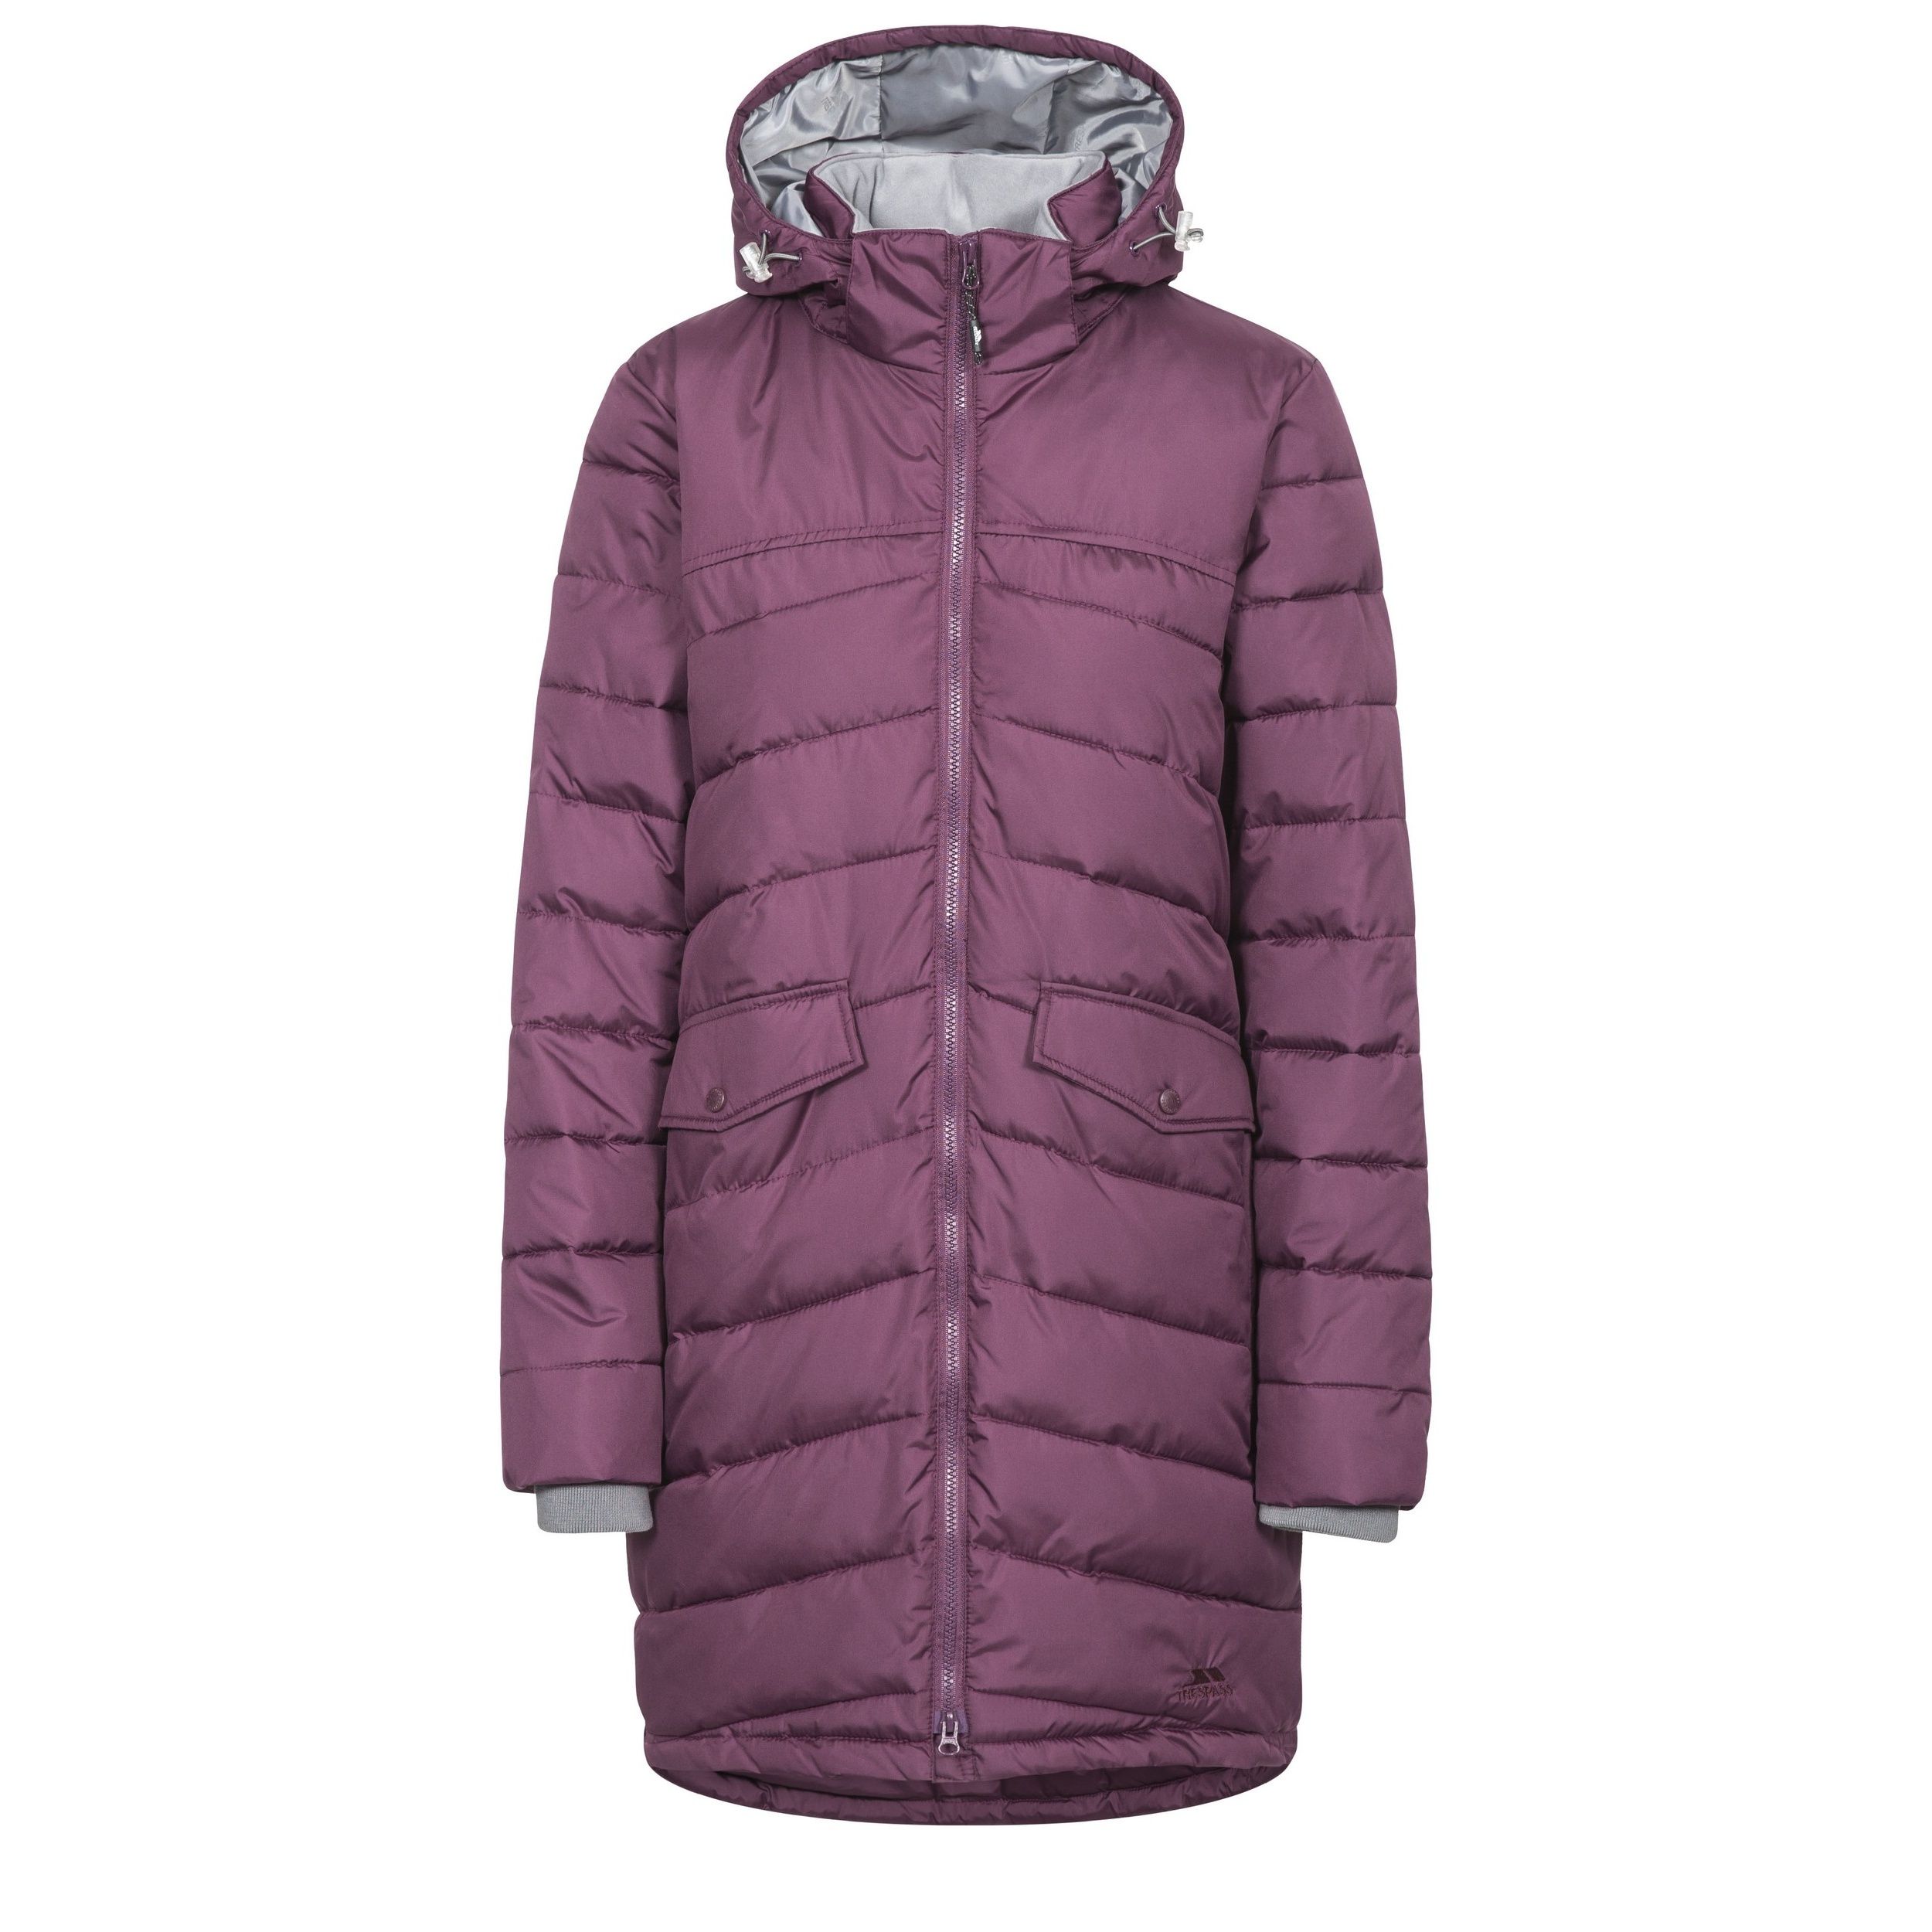 Adjustable zip off hood. Tricot lined collar. Knitted inner cuff. 2 double entry pockets. Tricot lined pocket bags. Shell: 100% Polyester, Lining: 100% Polyester, Filling: 100% Polyester. Trespass Womens Chest Sizing (approx): XS/8 - 32in/81cm, S/10 - 34in/86cm, M/12 - 36in/91.4cm, L/14 - 38in/96.5cm, XL/16 - 40in/101.5cm, XXL/18 - 42in/106.5cm.